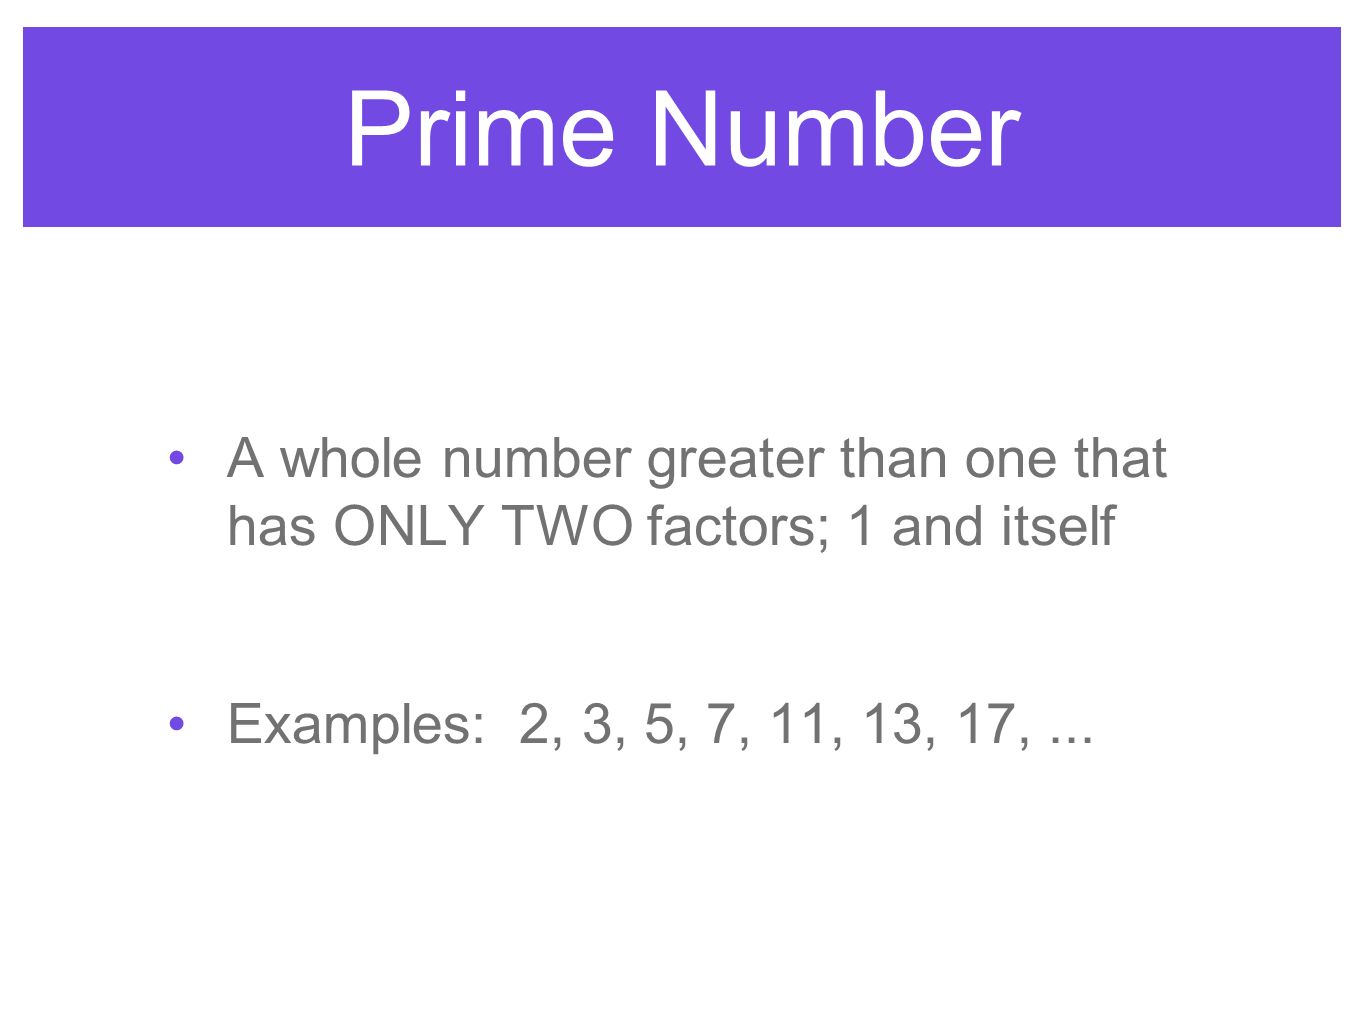 Prime Number A whole number greater than one that has ONLY TWO factors; 1 and itself.